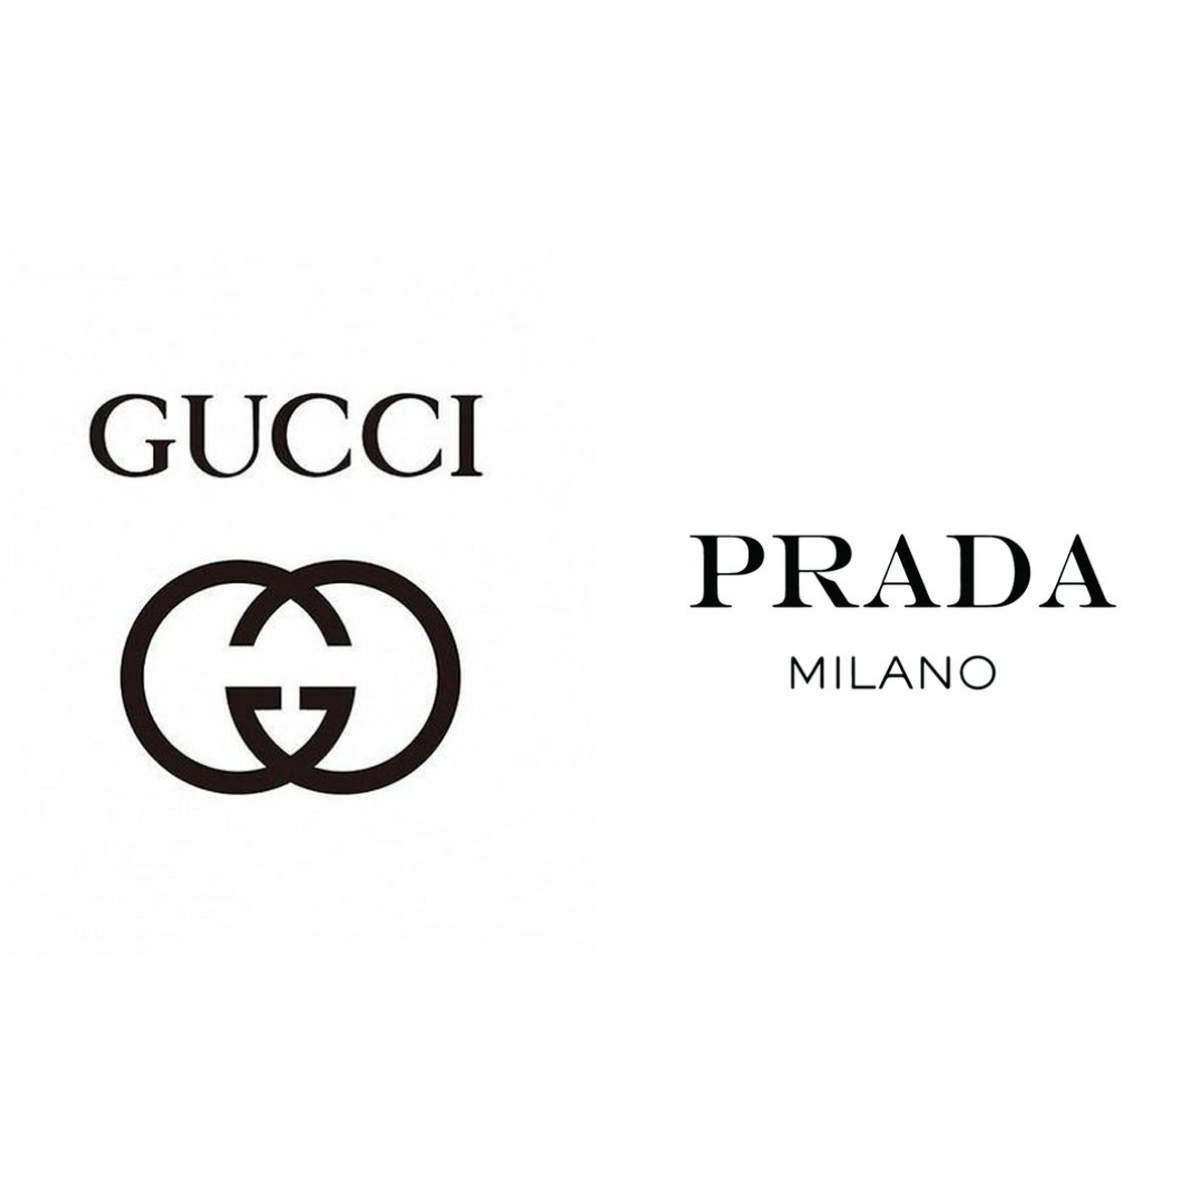 PRADA on X: We are committed to creating products that celebrate the  diverse fashion and beauty of cultures around the world. We've removed all  Pradamalia products that were offensive from the market